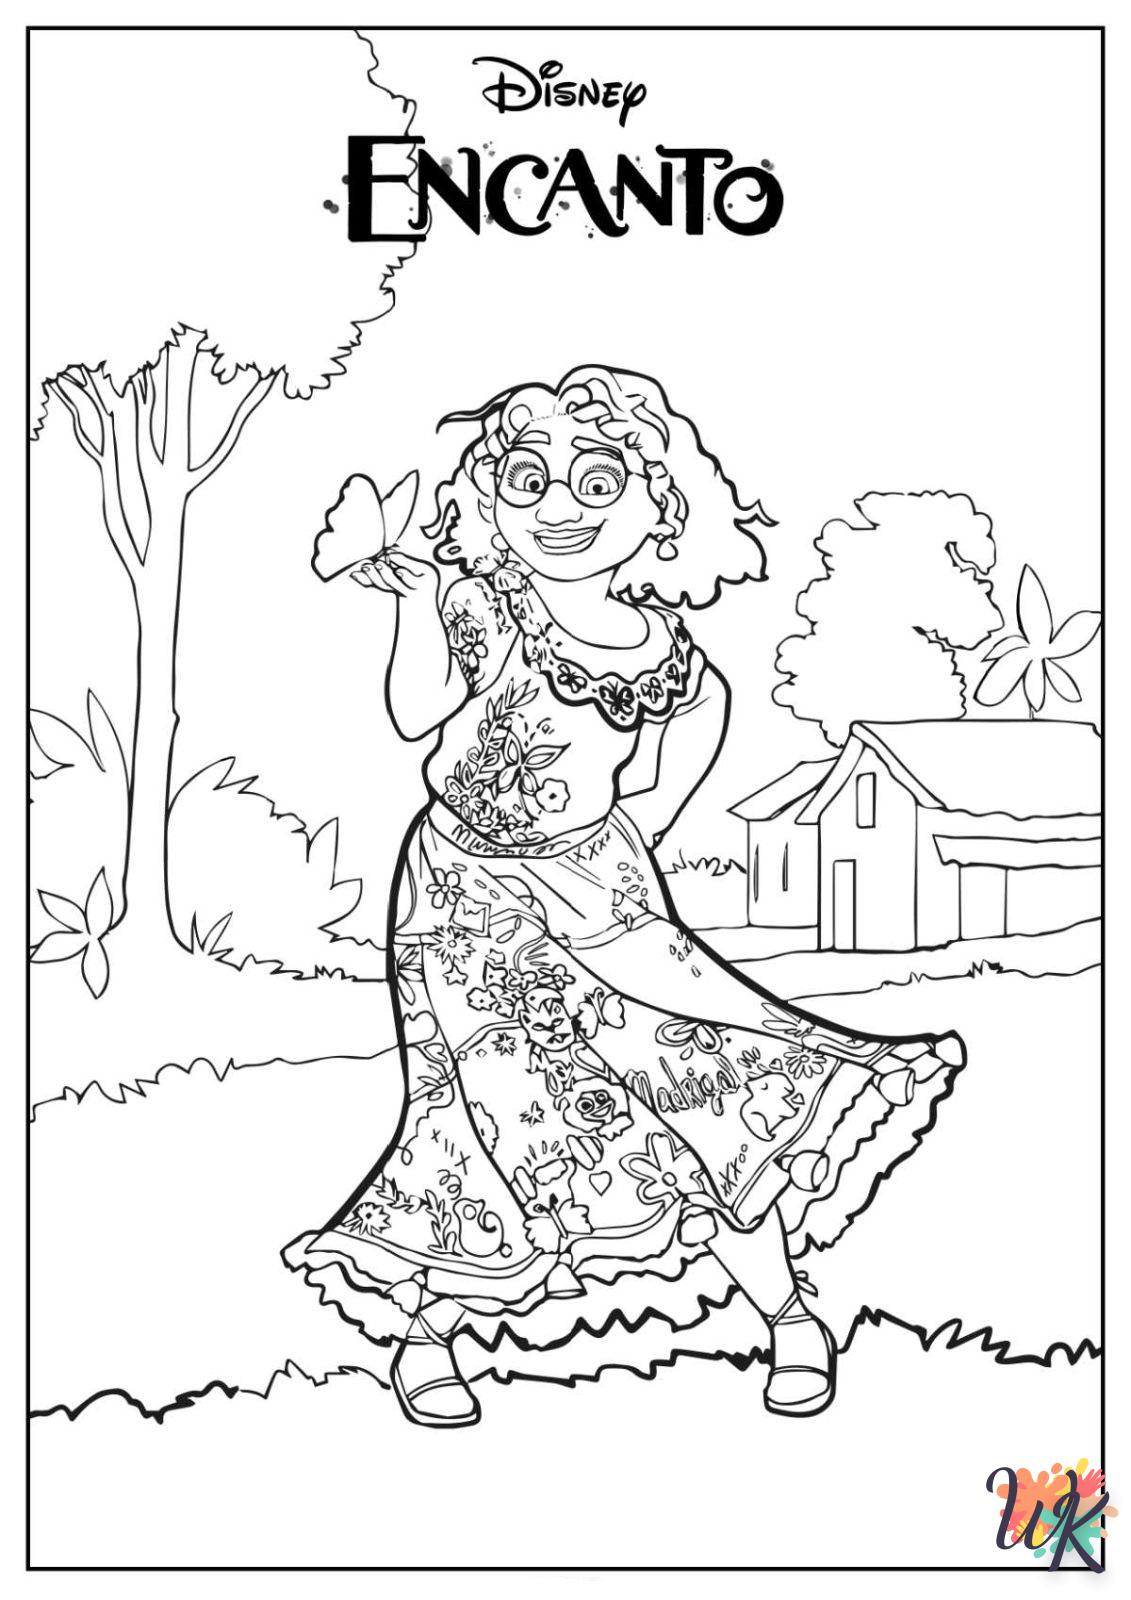 Encanto coloring pages free printable